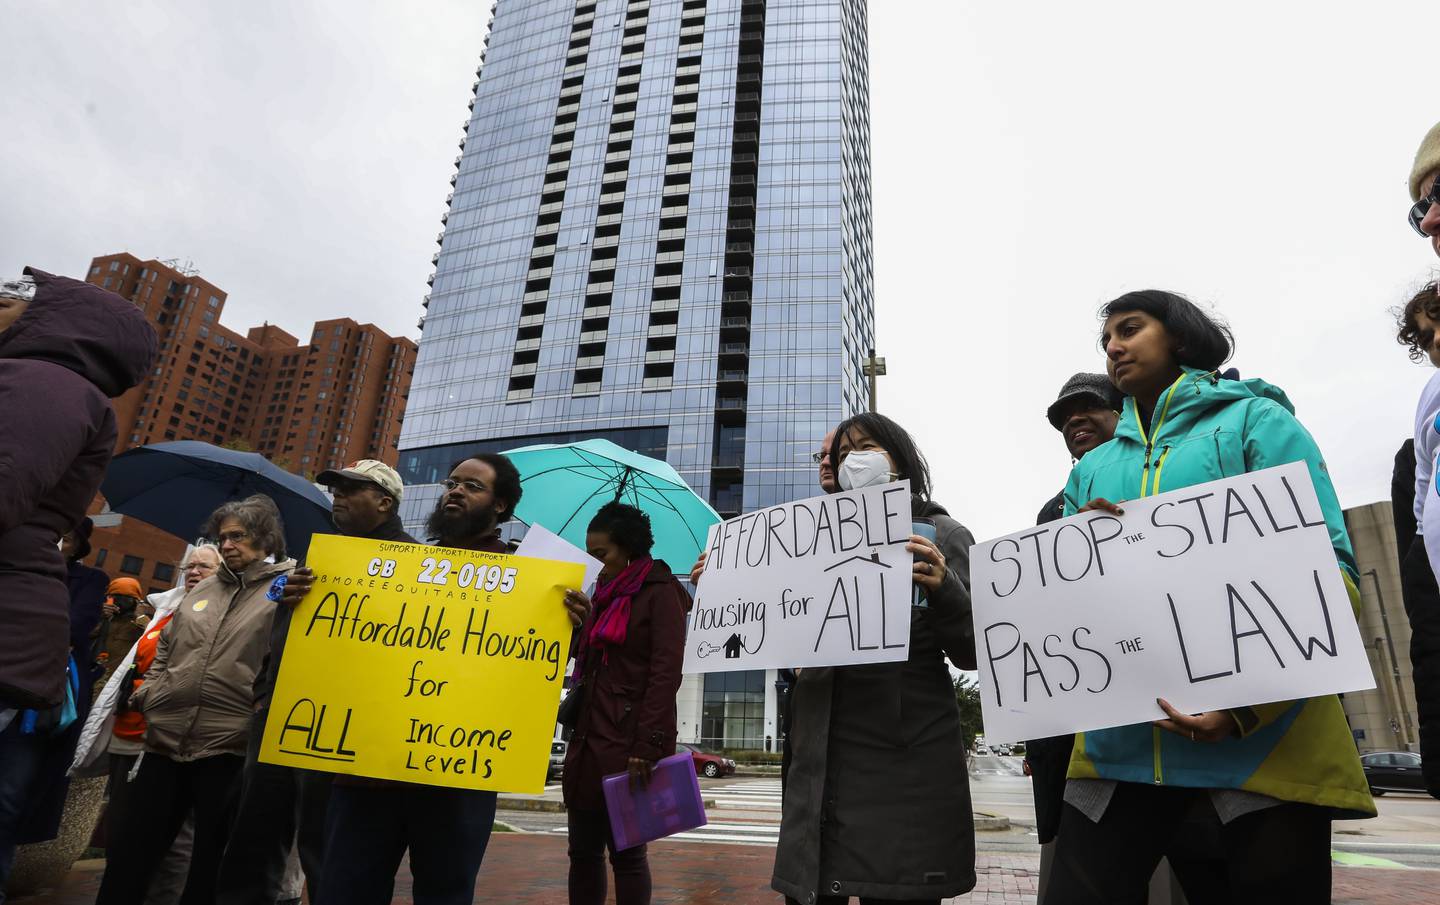 Terrel Askew, 35, Hieu Truong, 38, and Loraine Arikat, 26, all from Baltimore hold up signs in support of affordable housing. A rally in support of the BMOREEquitable Council Bill 22-0195, which demands equitable and affordable housing options for all, took place outside of 401 Light Street on October 3, 2022.